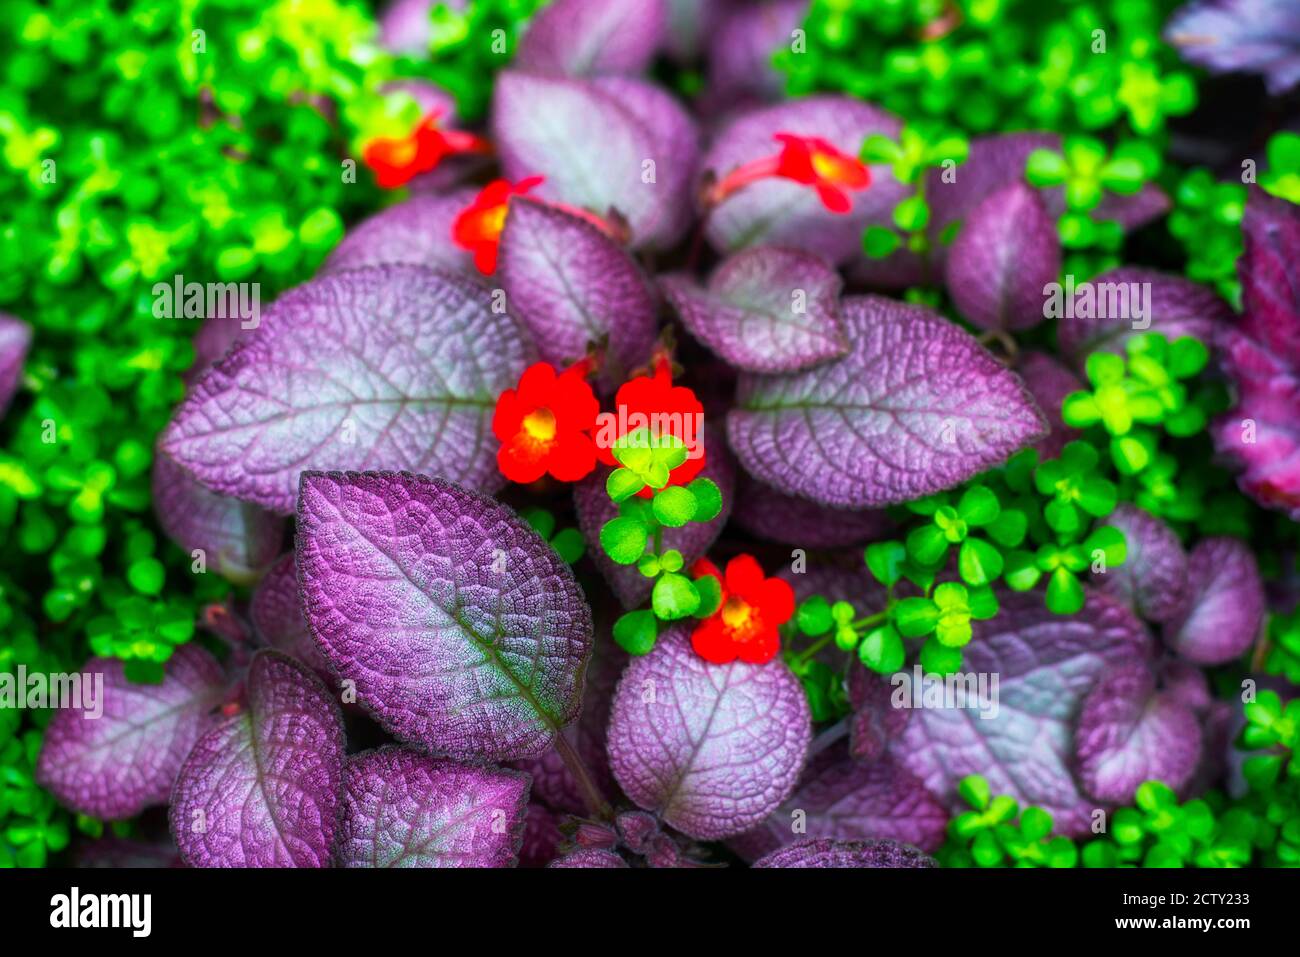 A flame violet temptation or episcia species blooming in a tropical ecosystem in the montreal bontanical gardens. Stock Photo